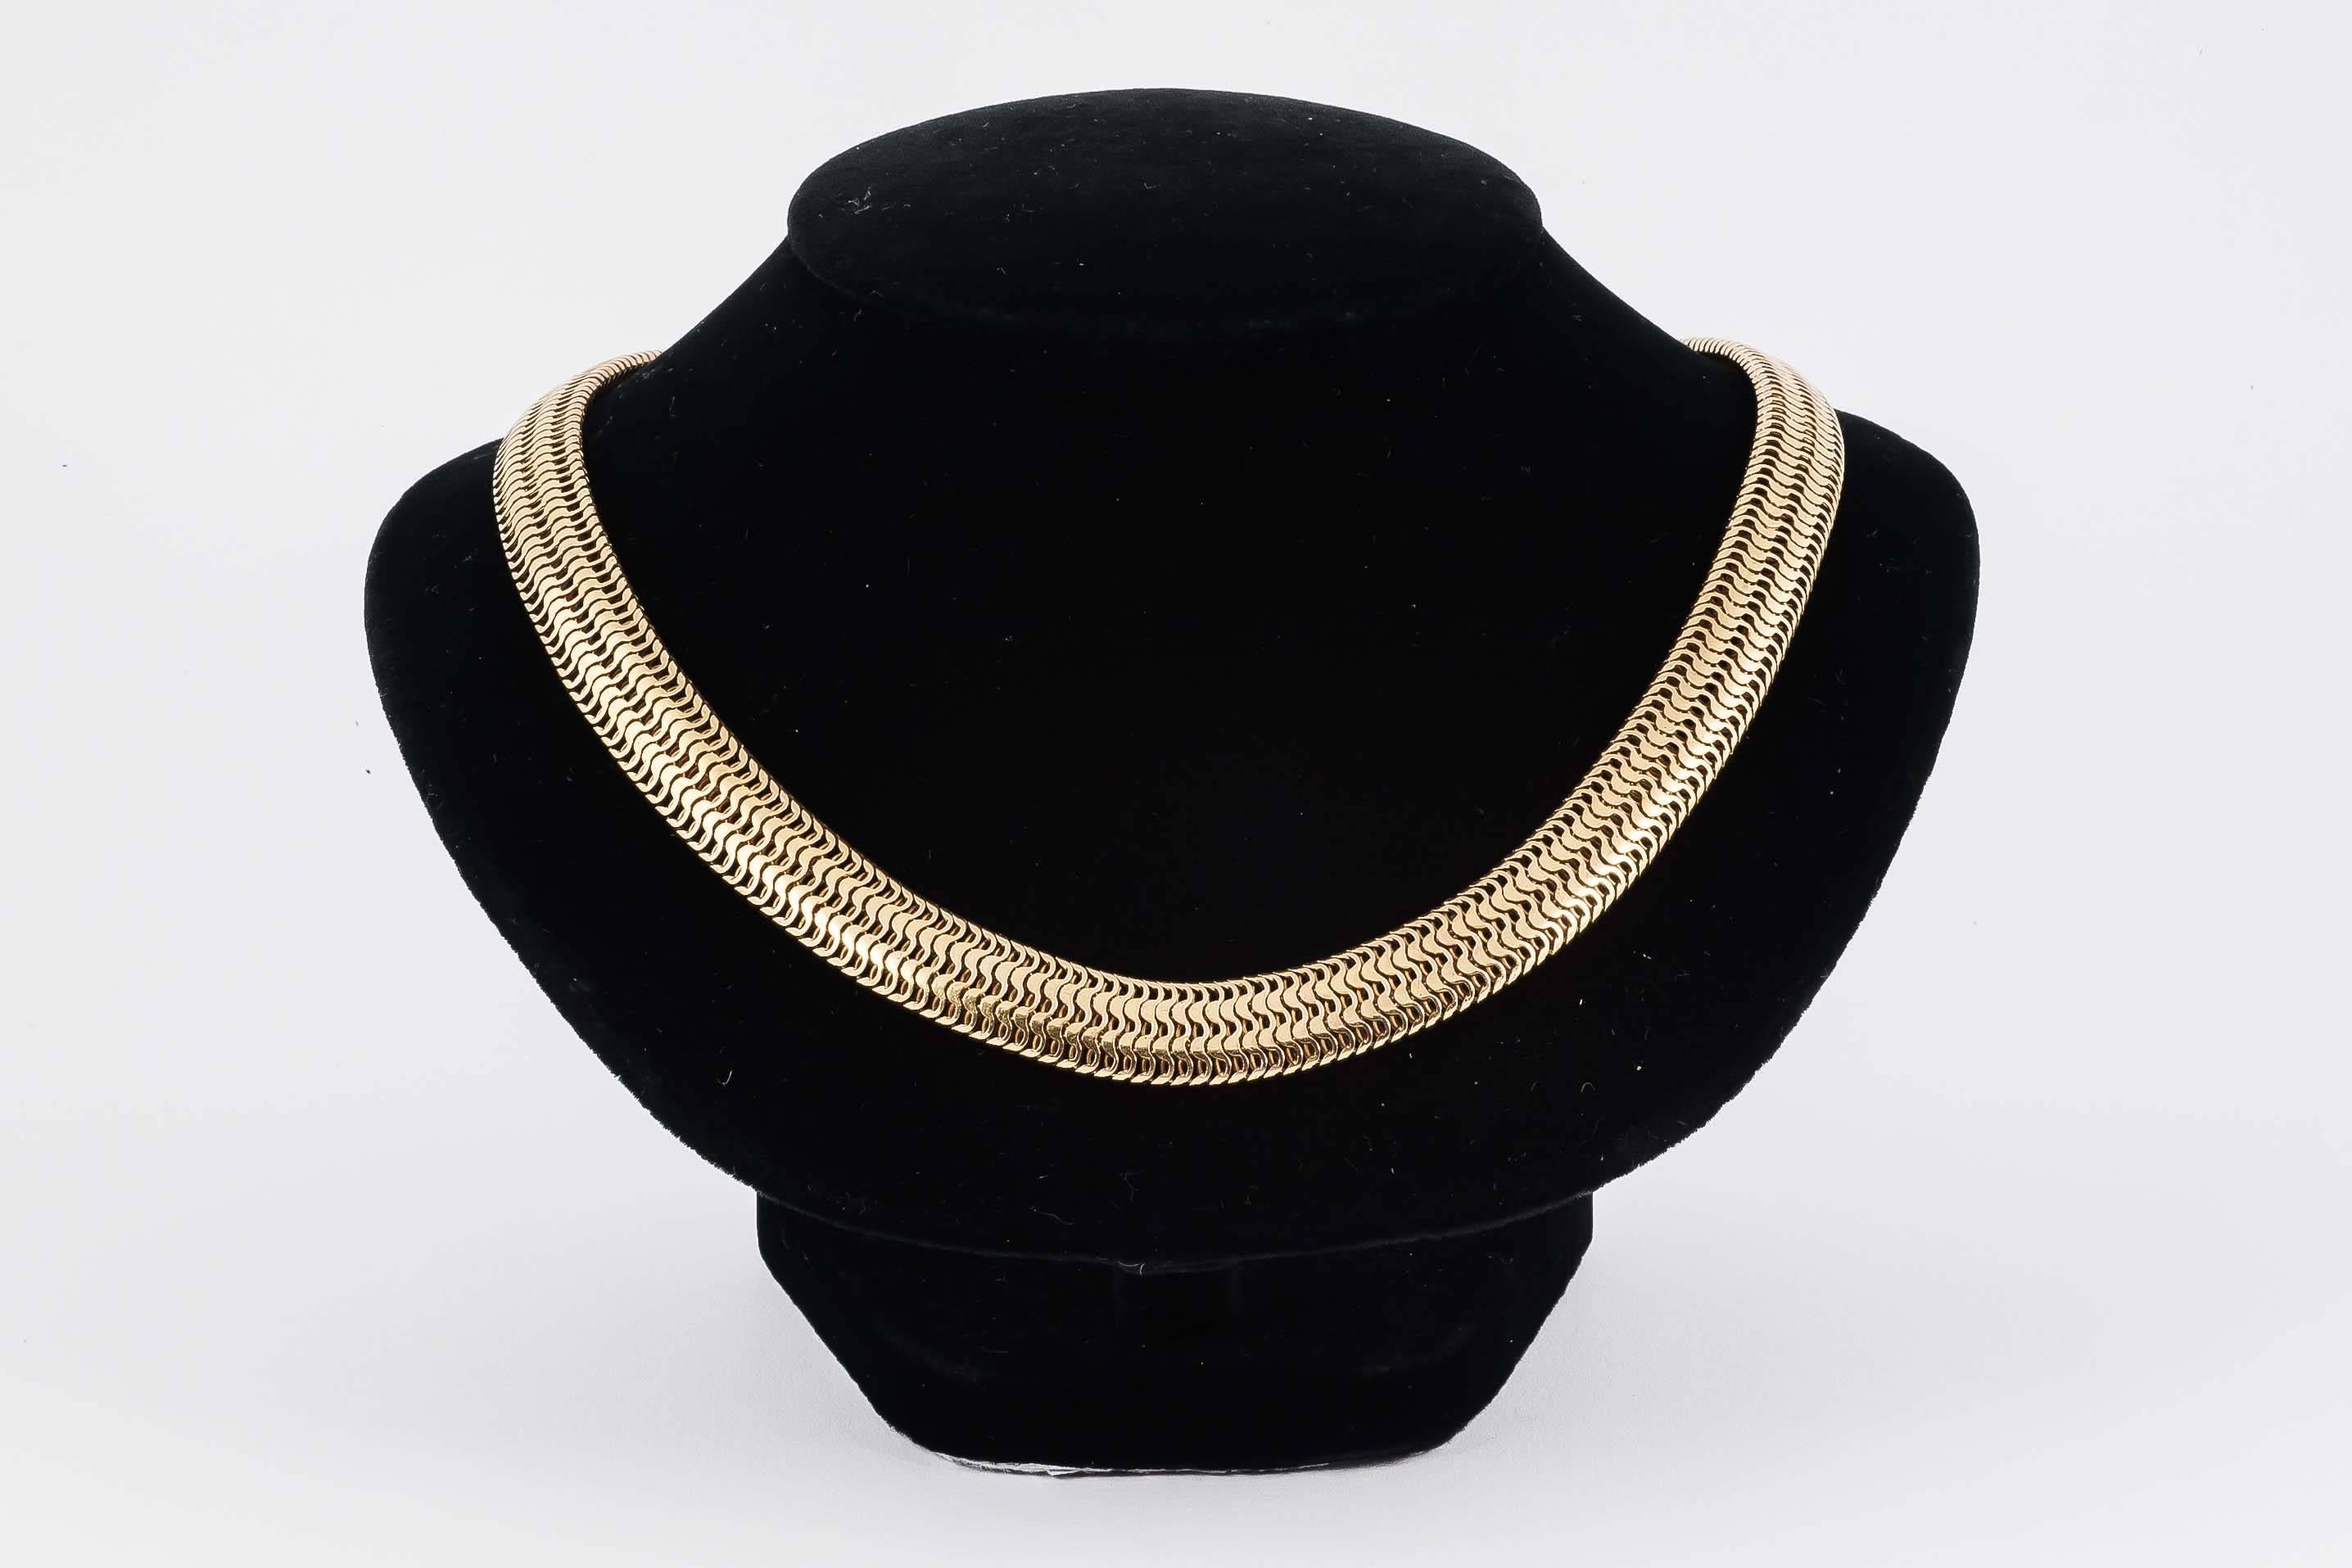 This beautifully articulated collar has an integral clasp